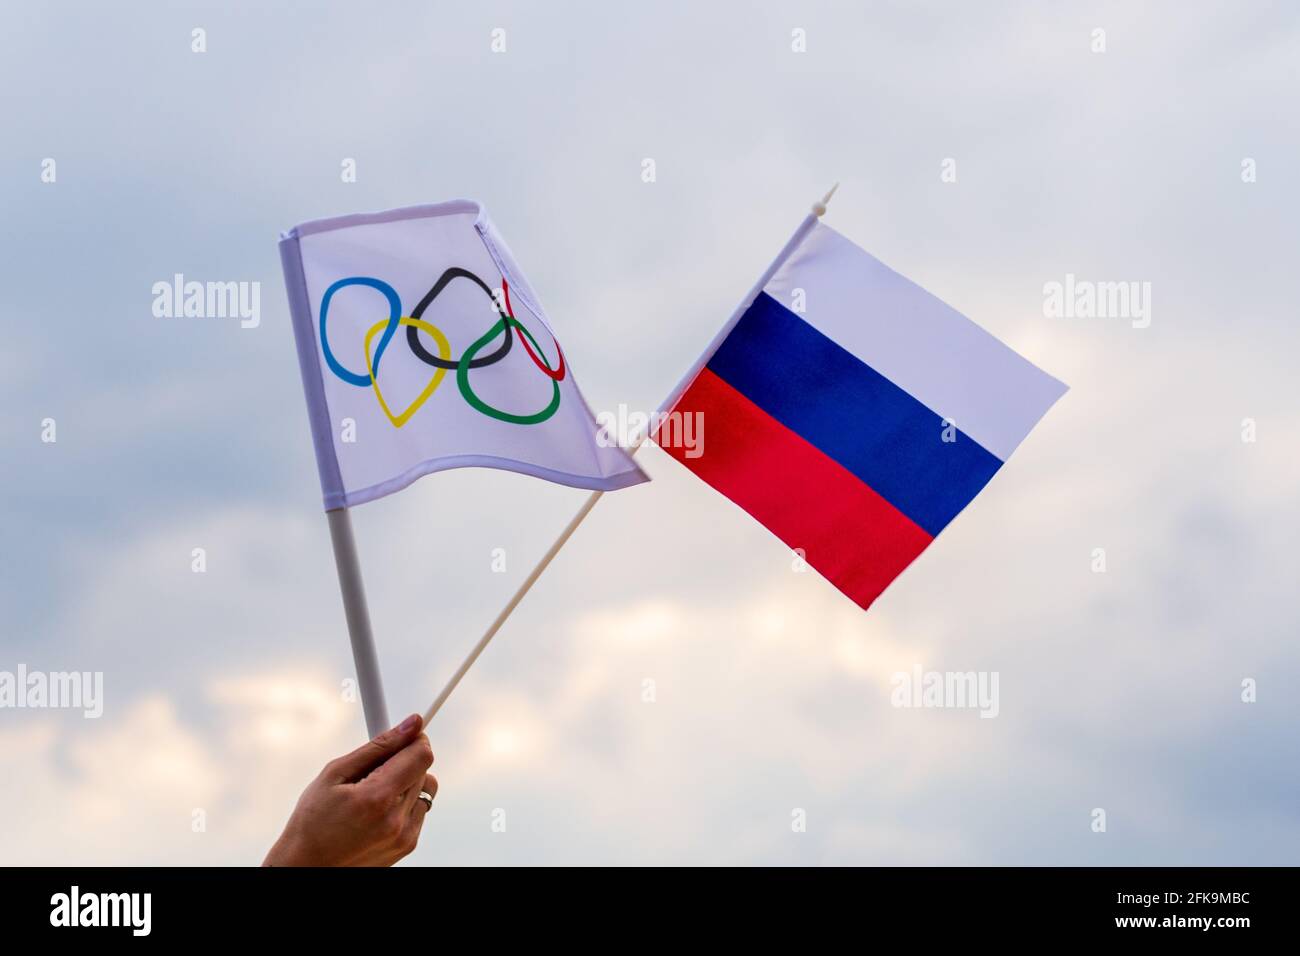 Fan waving the national flag of  Russia and the Olympic flag with symbol olympics rings. Stock Photo